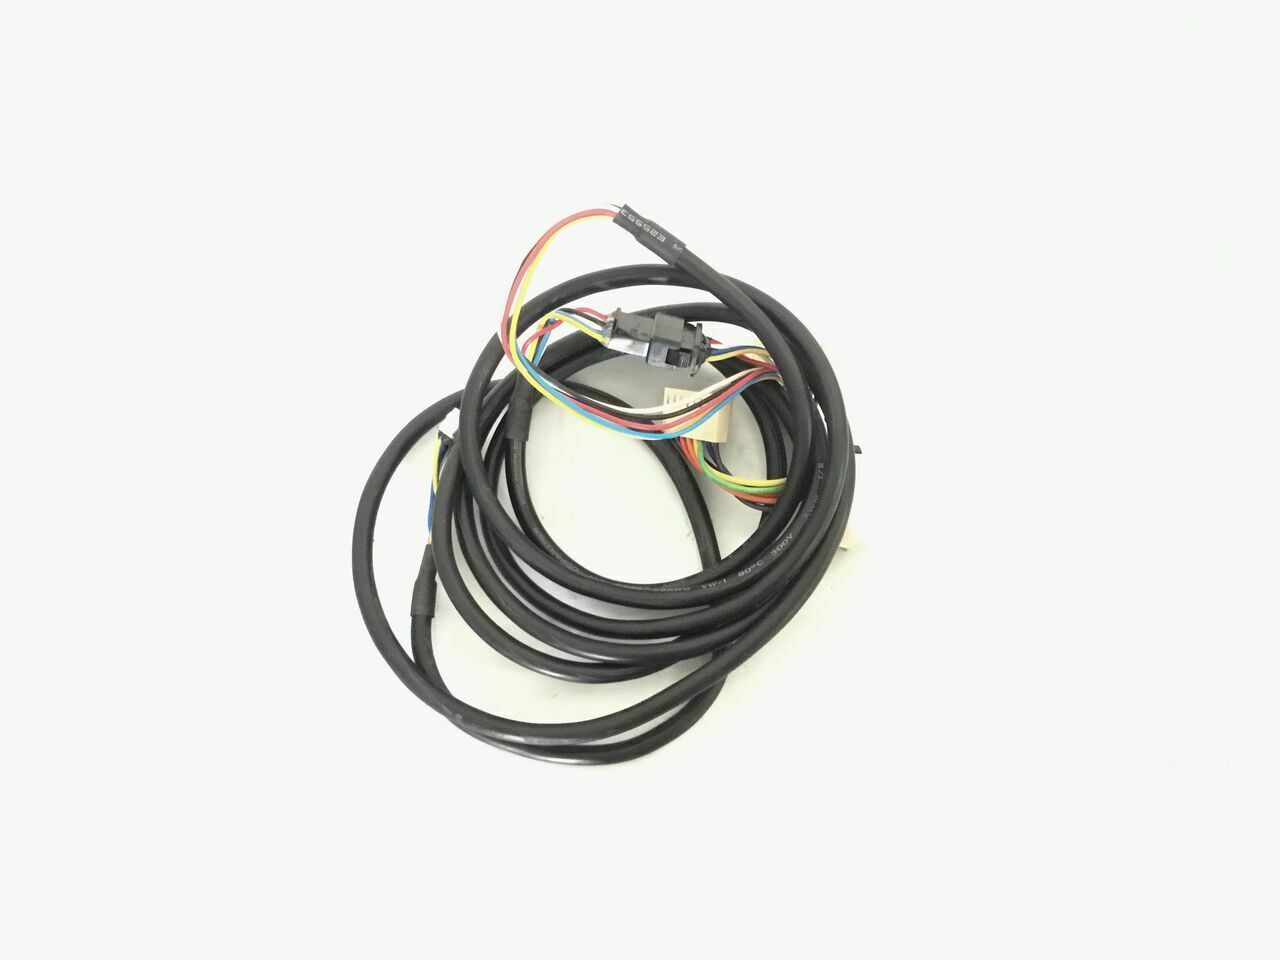 True Fitness XCS800 Elliptical Console Power Middle Interconnect Wire Harness (Used)